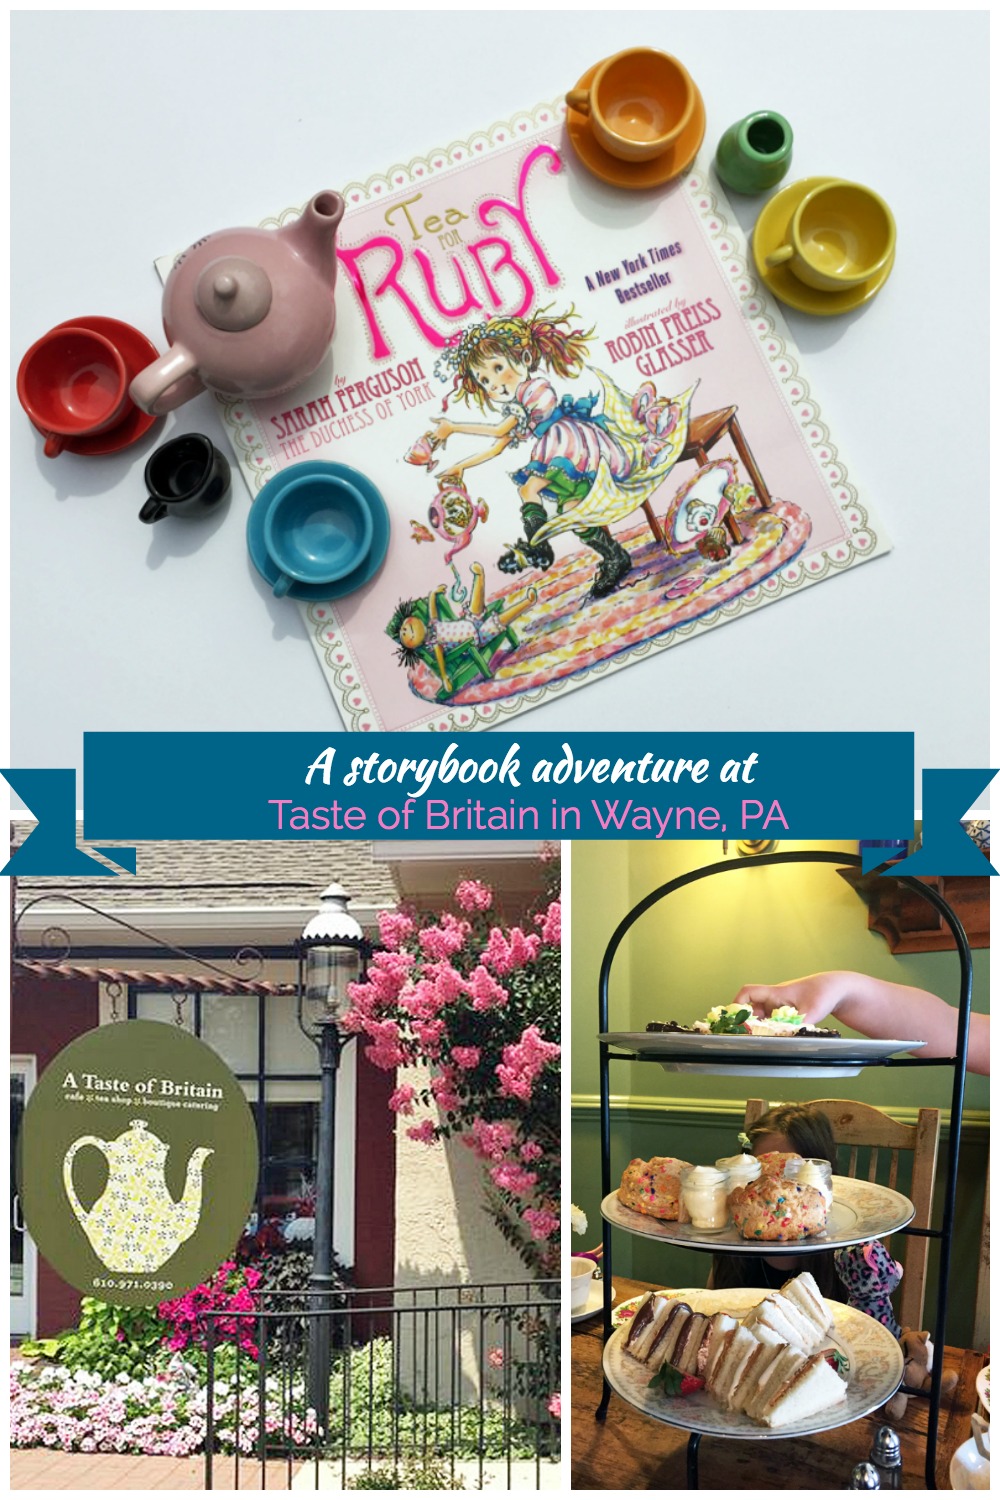 A storybook adventure featuring the book, Tea for Ruby and a tea party at Taste of Britain in Wayne, PA